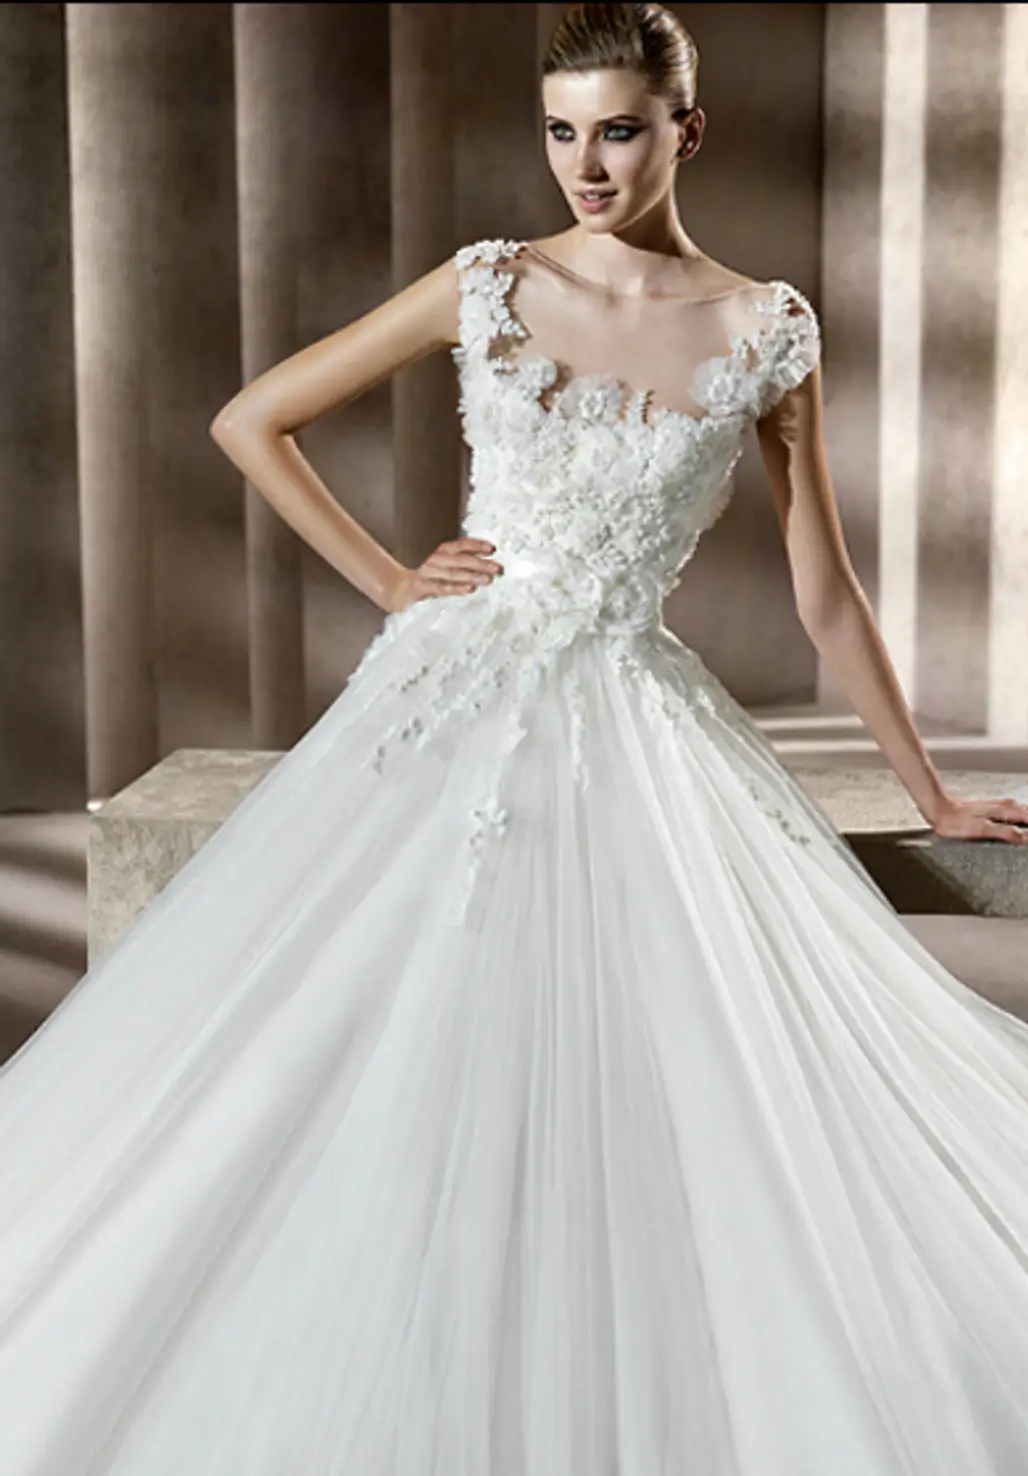 Elie by Elie Saab "Neftis" White Ballgown with Full Organza Skirt and Floral Bodice Detailing